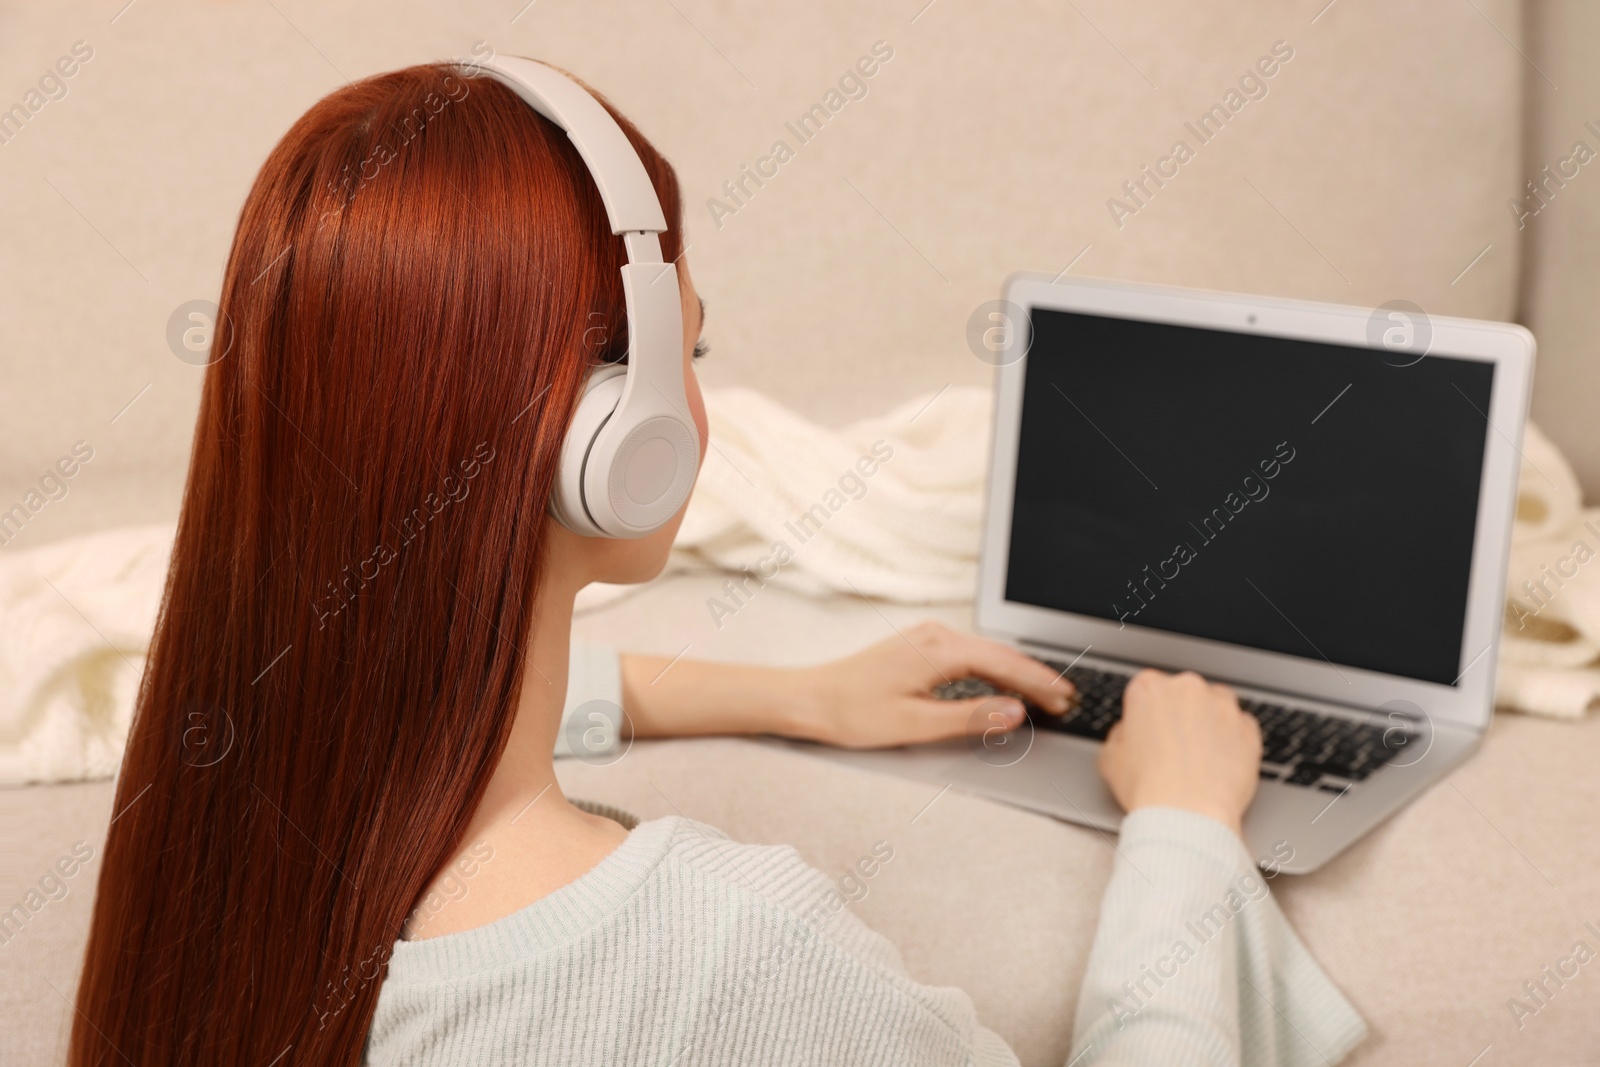 Photo of Woman with red dyed hair in headphone using laptop indoors